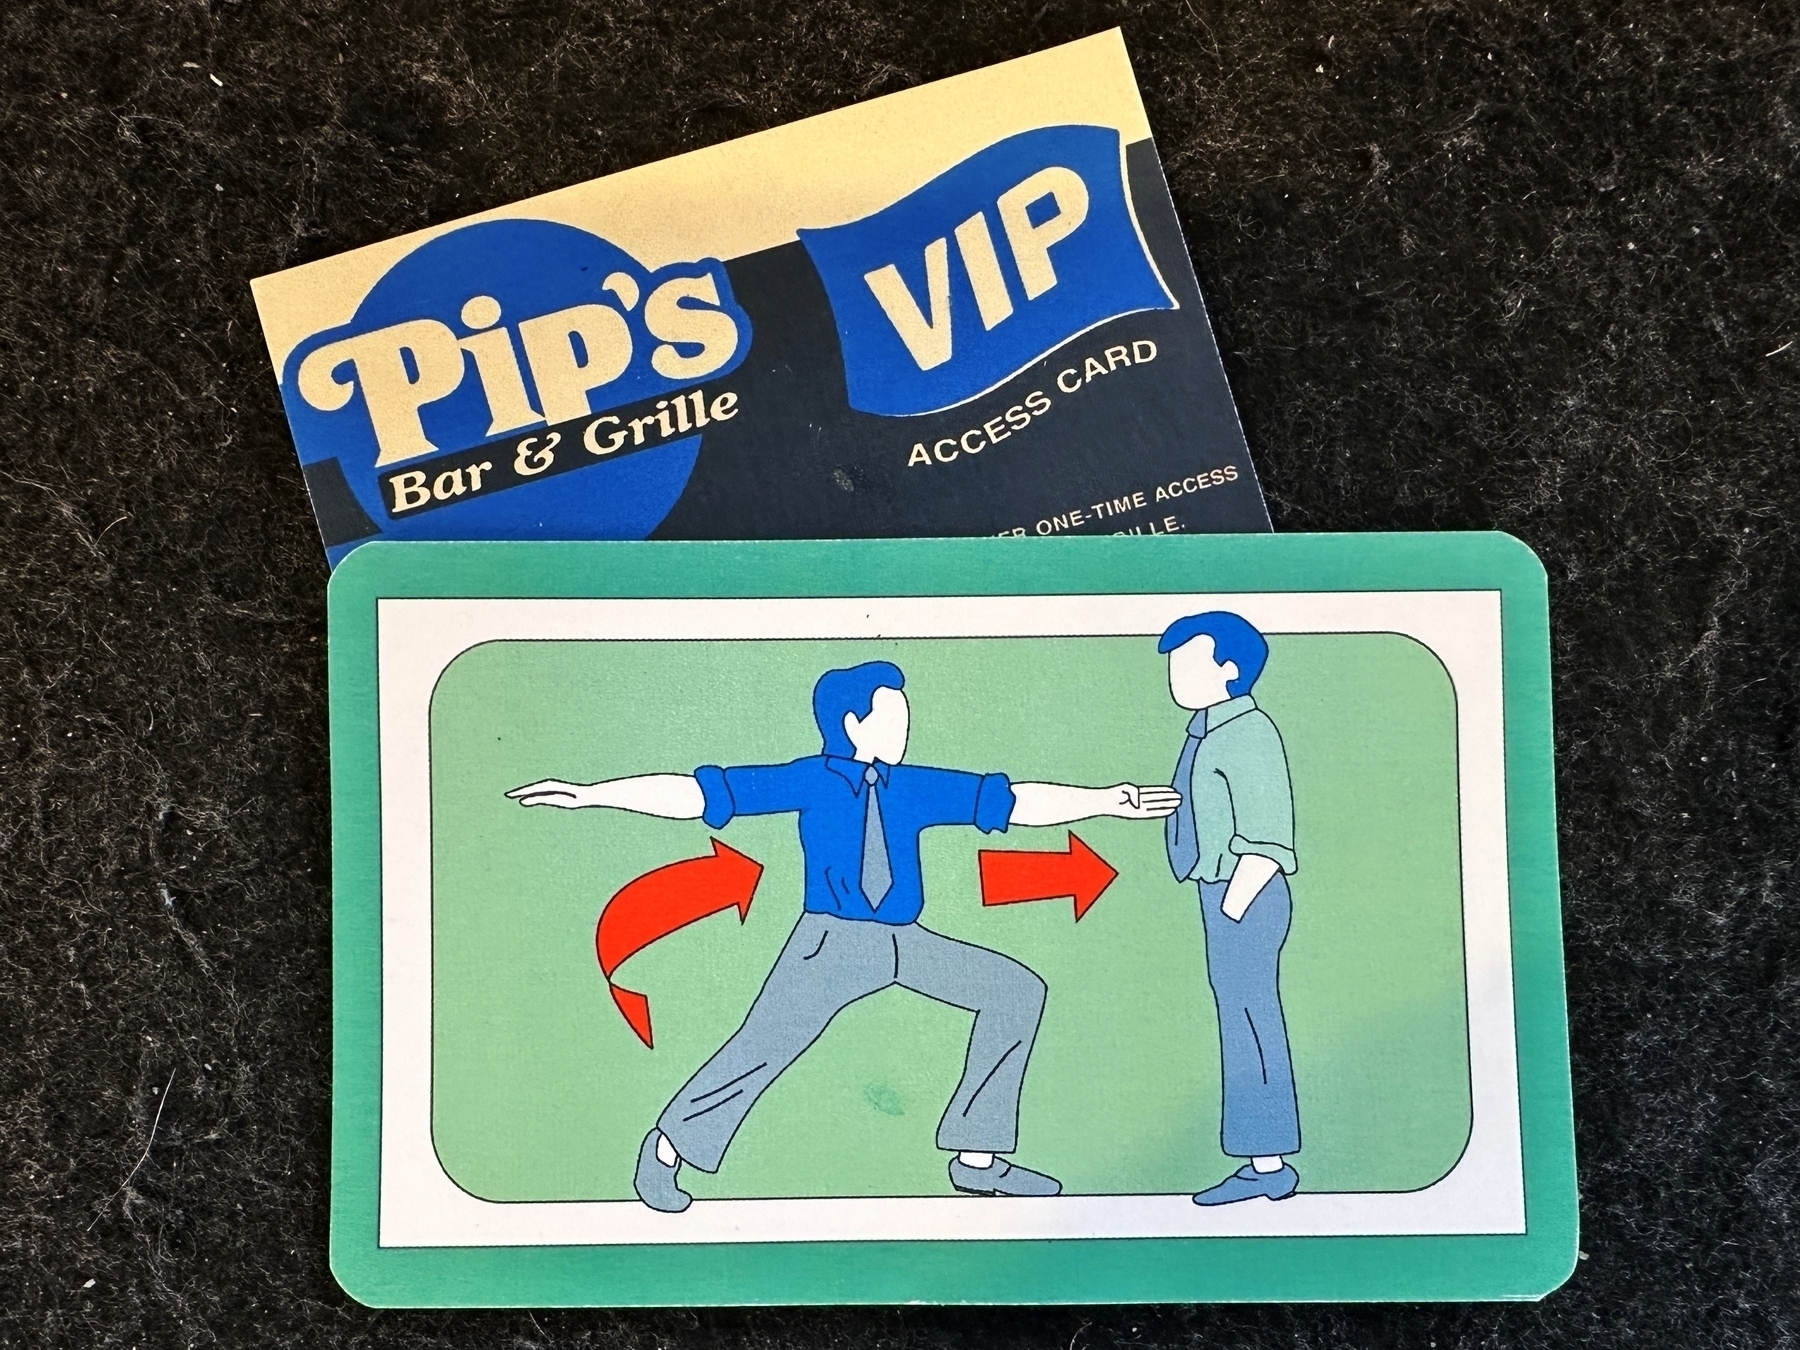 Two cards are shown; one illustrates a person using a hip bump to open a door, and the other is labeled “Pip’s VIP ACCESS CARD.